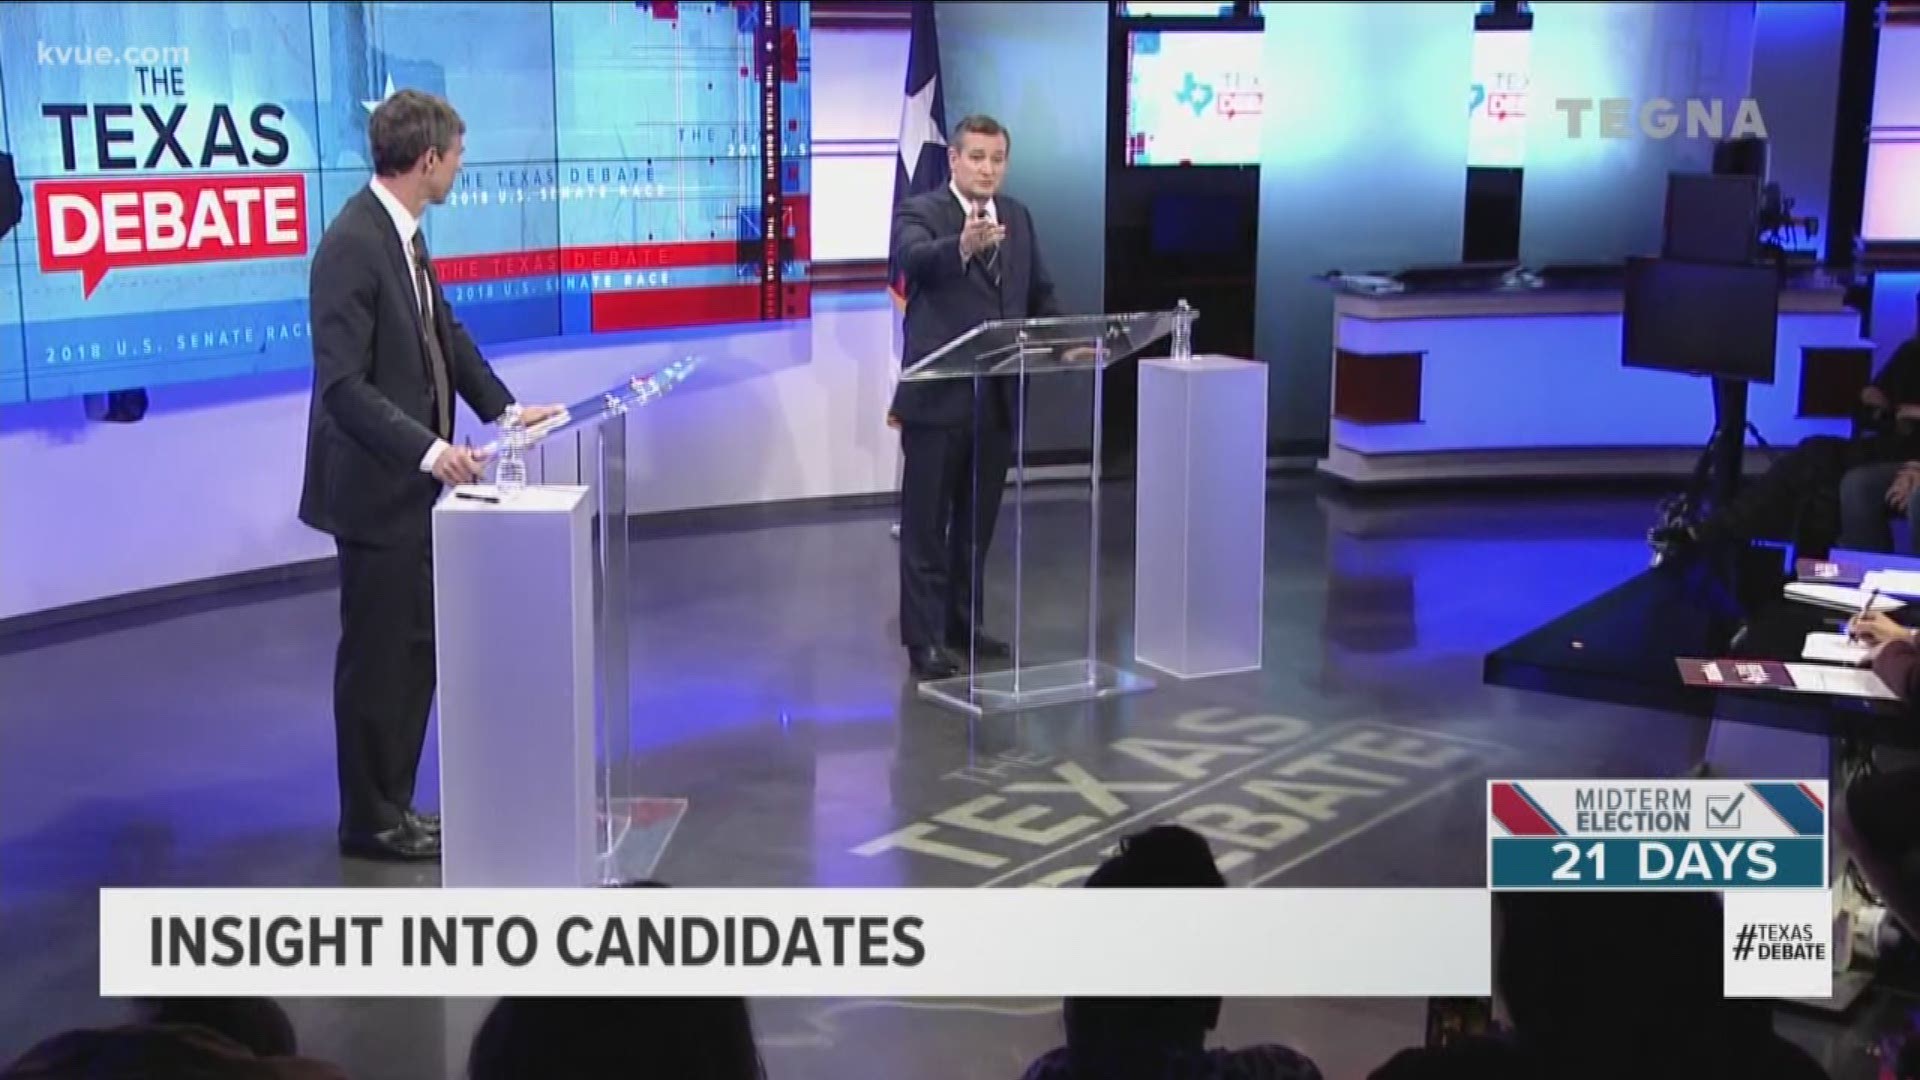 U.S. Sen. Ted Cruz (R-Texas) and challenger U.S. Rep. Beto O'Rourke (D-El Paso) squared off for an hour in The Texas Debate at KENS 5 in San Antonio on Tuesday night.

The candidates clashed over climate change, Supreme Court judges, border control and mo